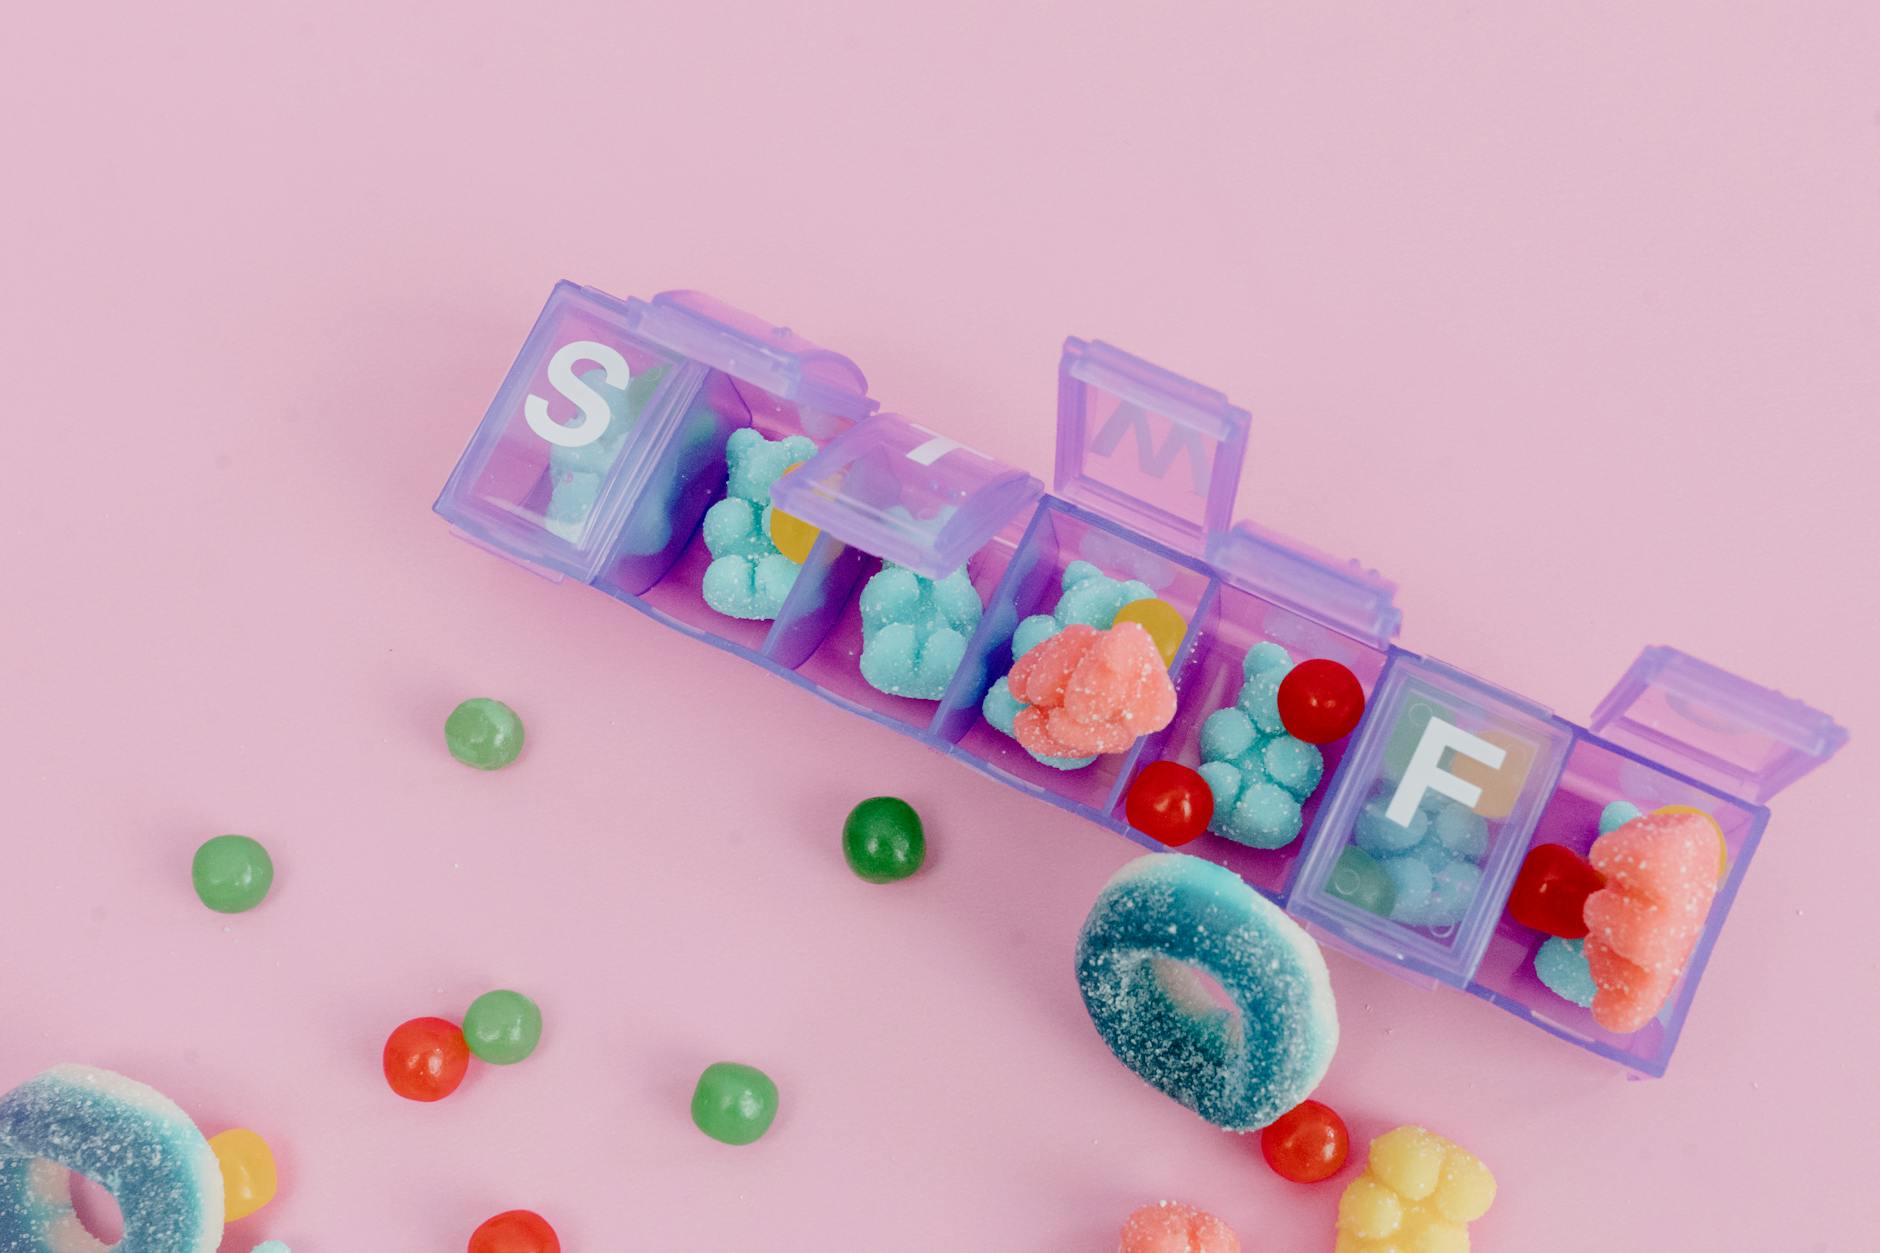 A Variety of Candies in a Pill Organizer